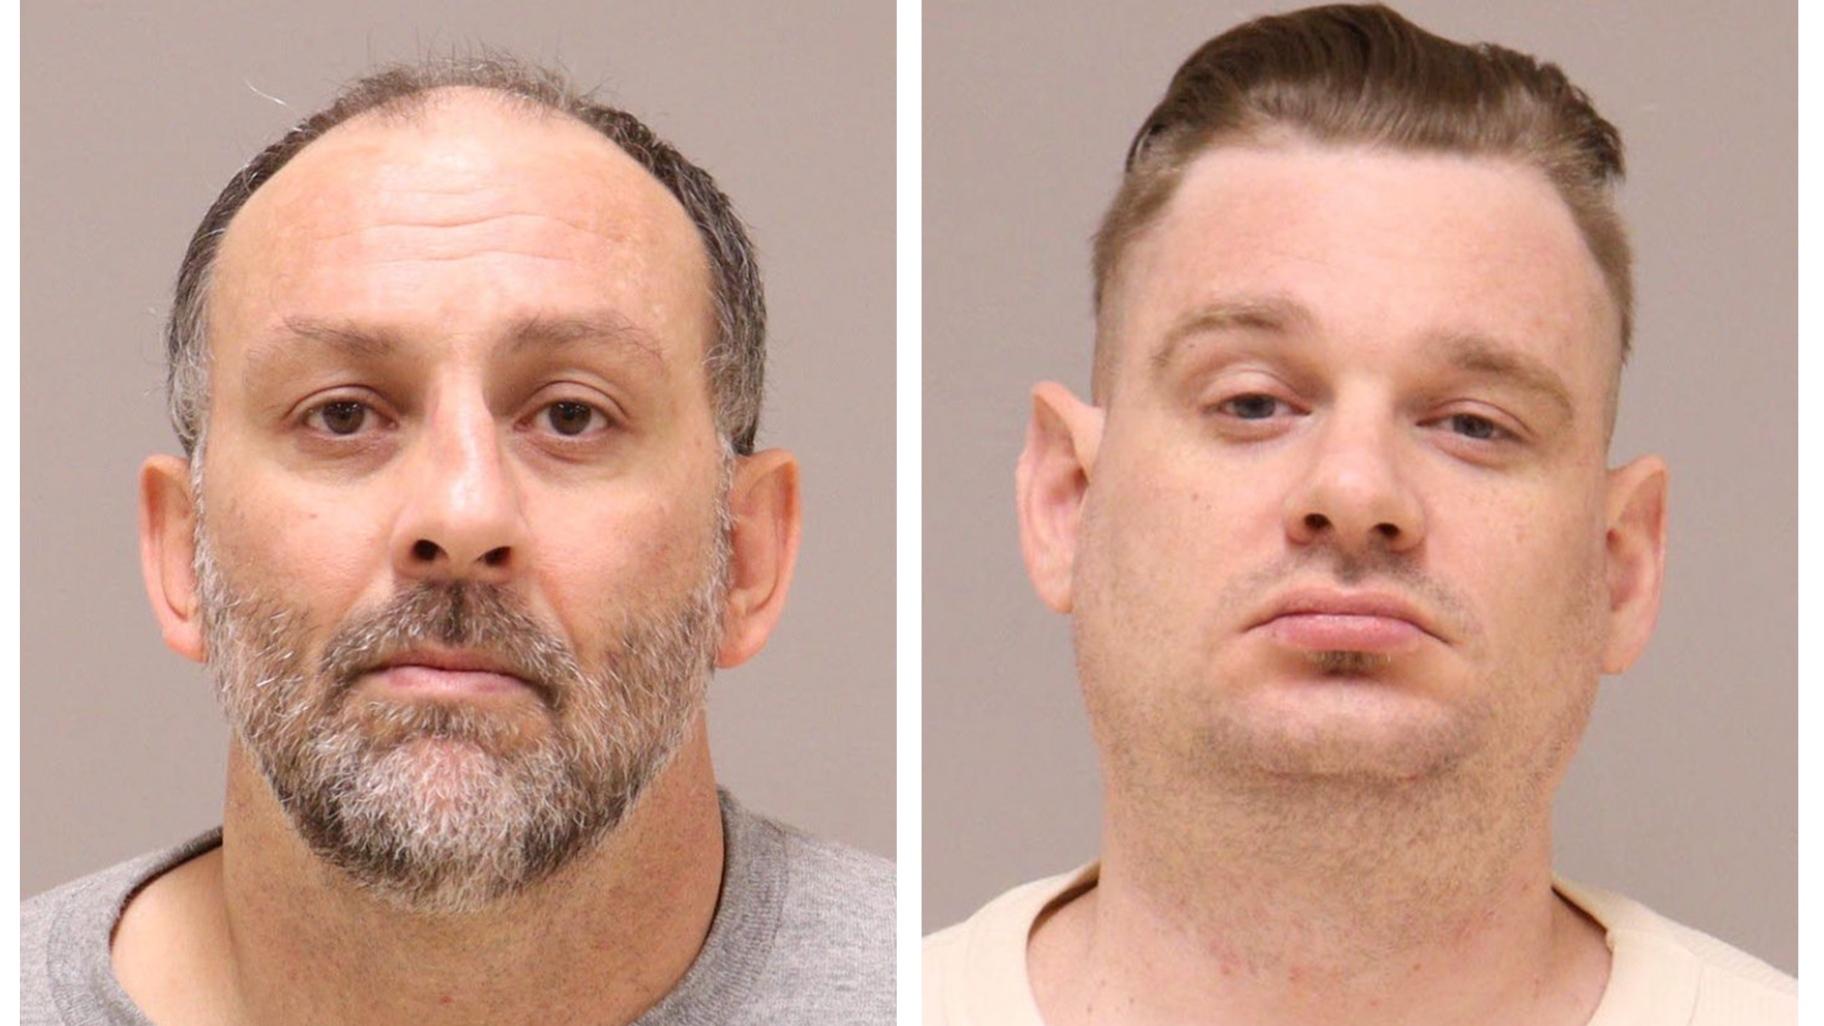 This combo of images provided by the Kent County, Mich., Jail. shows Barry Croft Jr., left, and Adam Fox. Jury selection started Tuesday, Aug. 9, 2022, in the second trial of the two men charged with conspiring to kidnap Michigan Gov. Gretchen Whitmer in 2020 over their disgust with restrictions early in the COVID-19 pandemic. (Kent County Sheriff’s Office via AP)